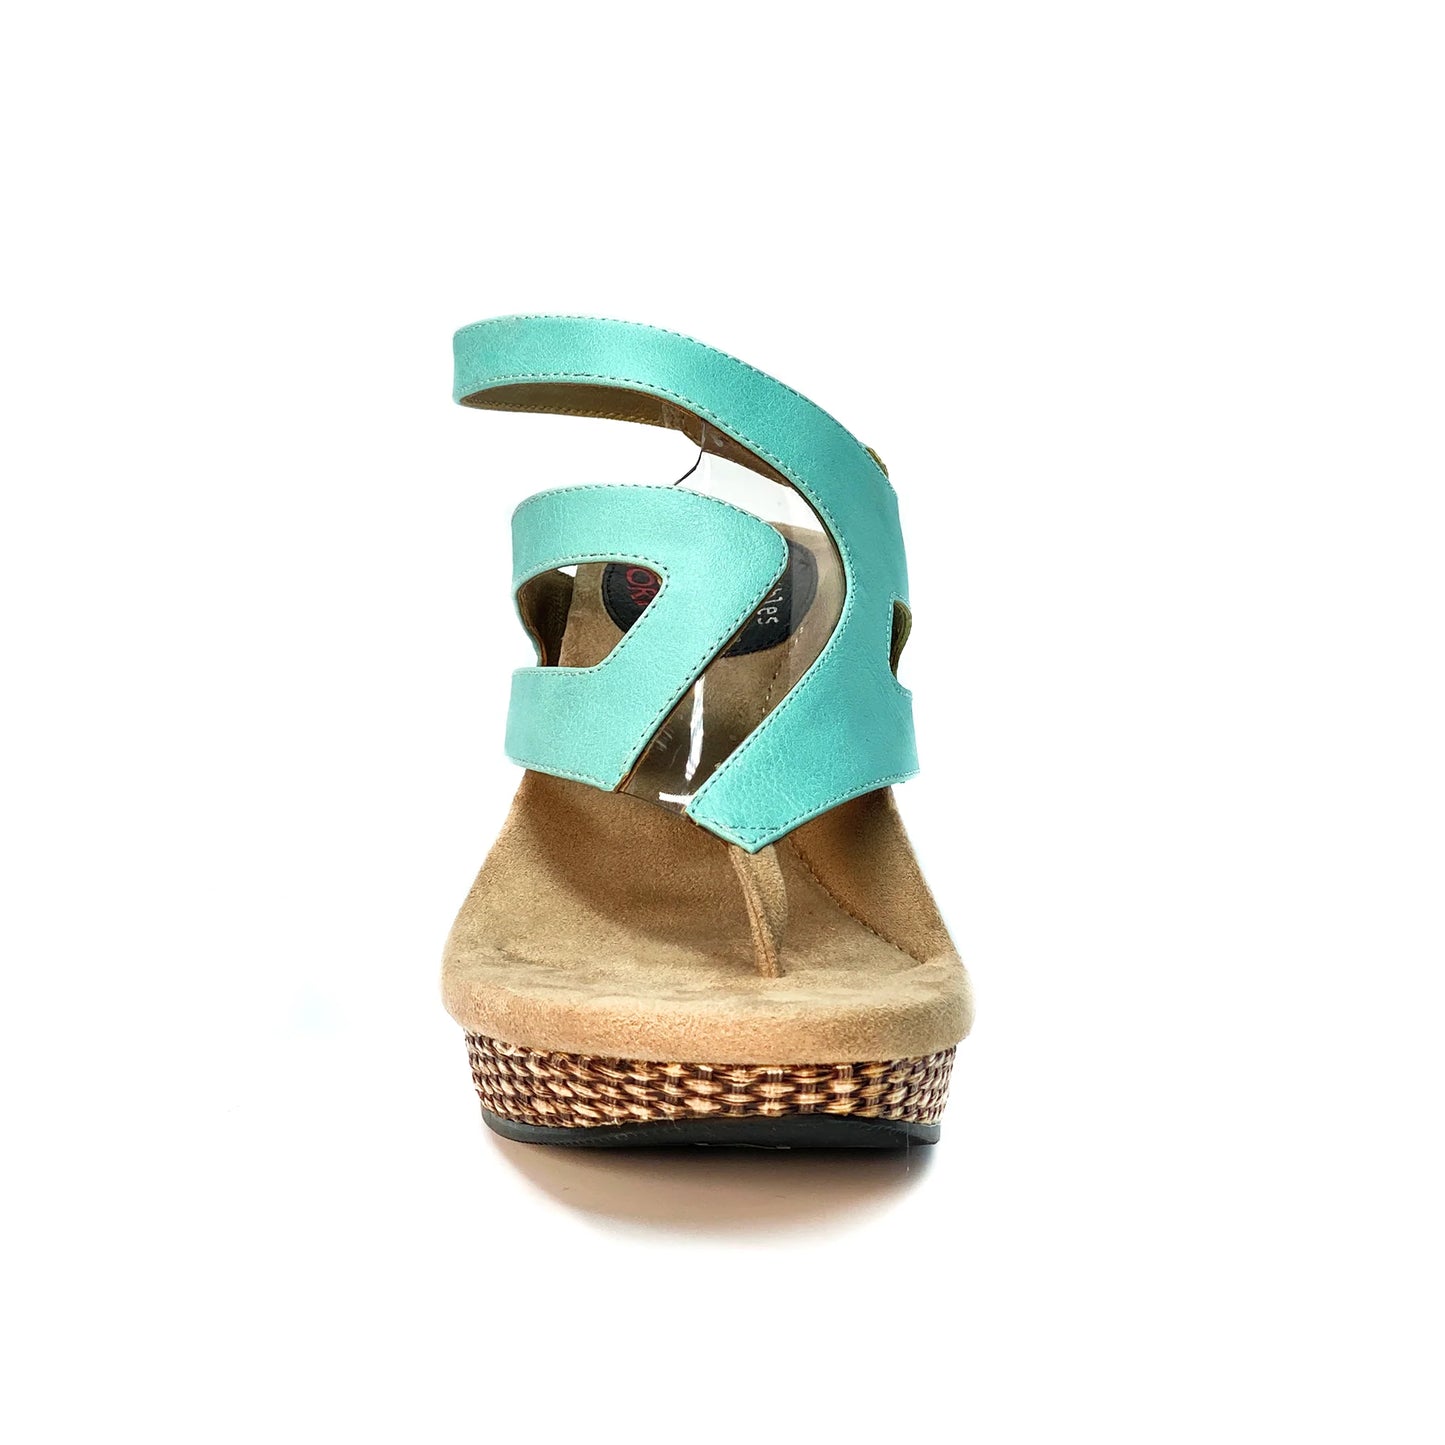 Reversible Sandals With Cut Out Design